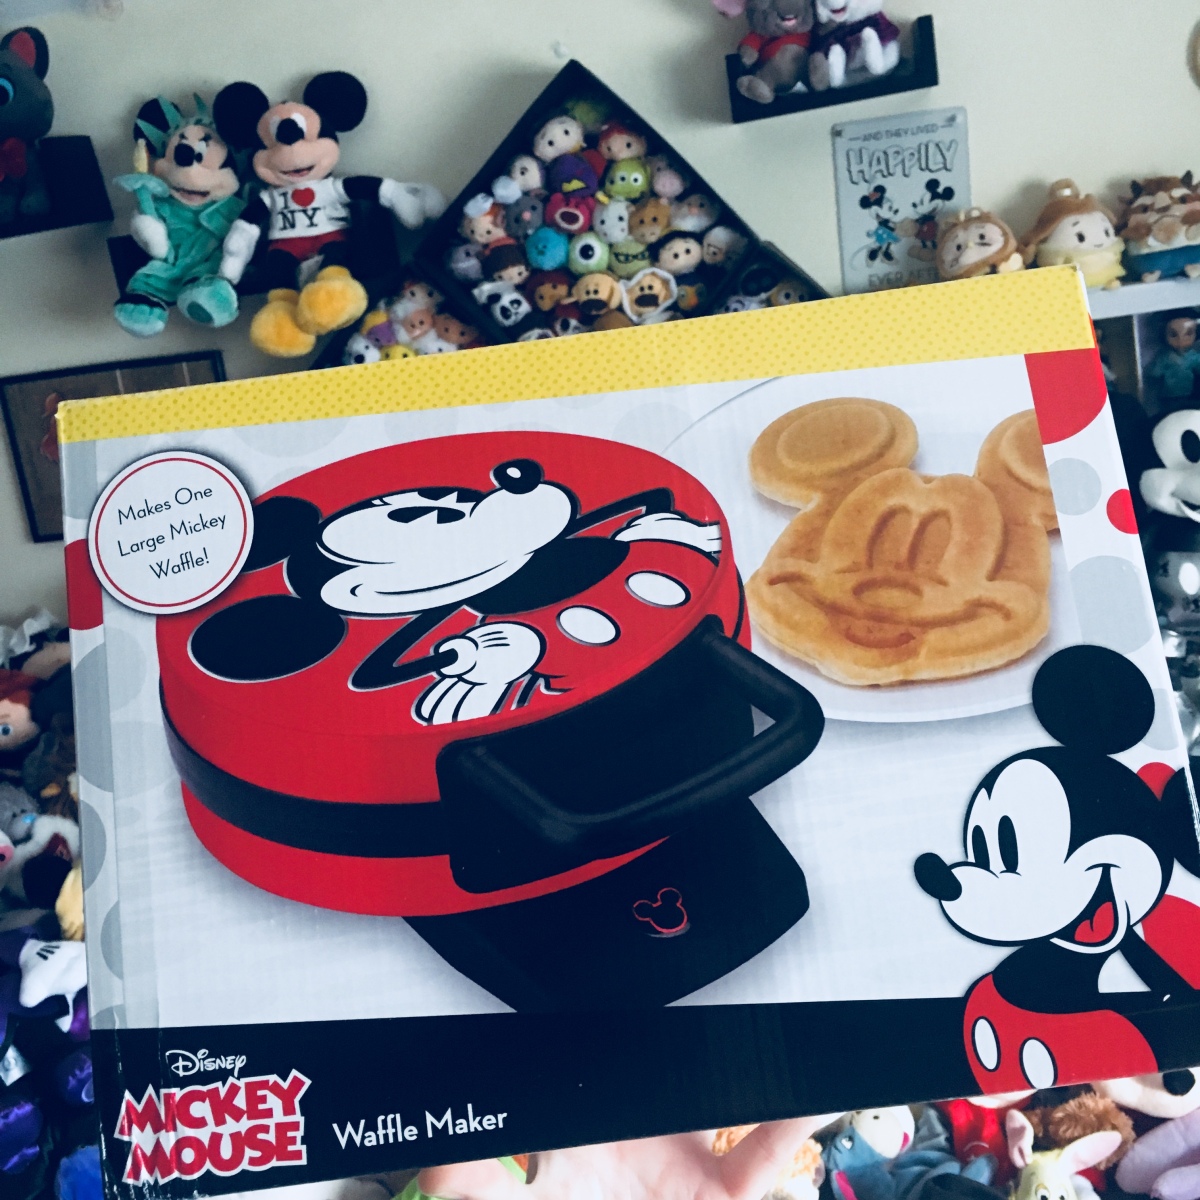 Mickey Mouse Waffle Maker on Sale!!!